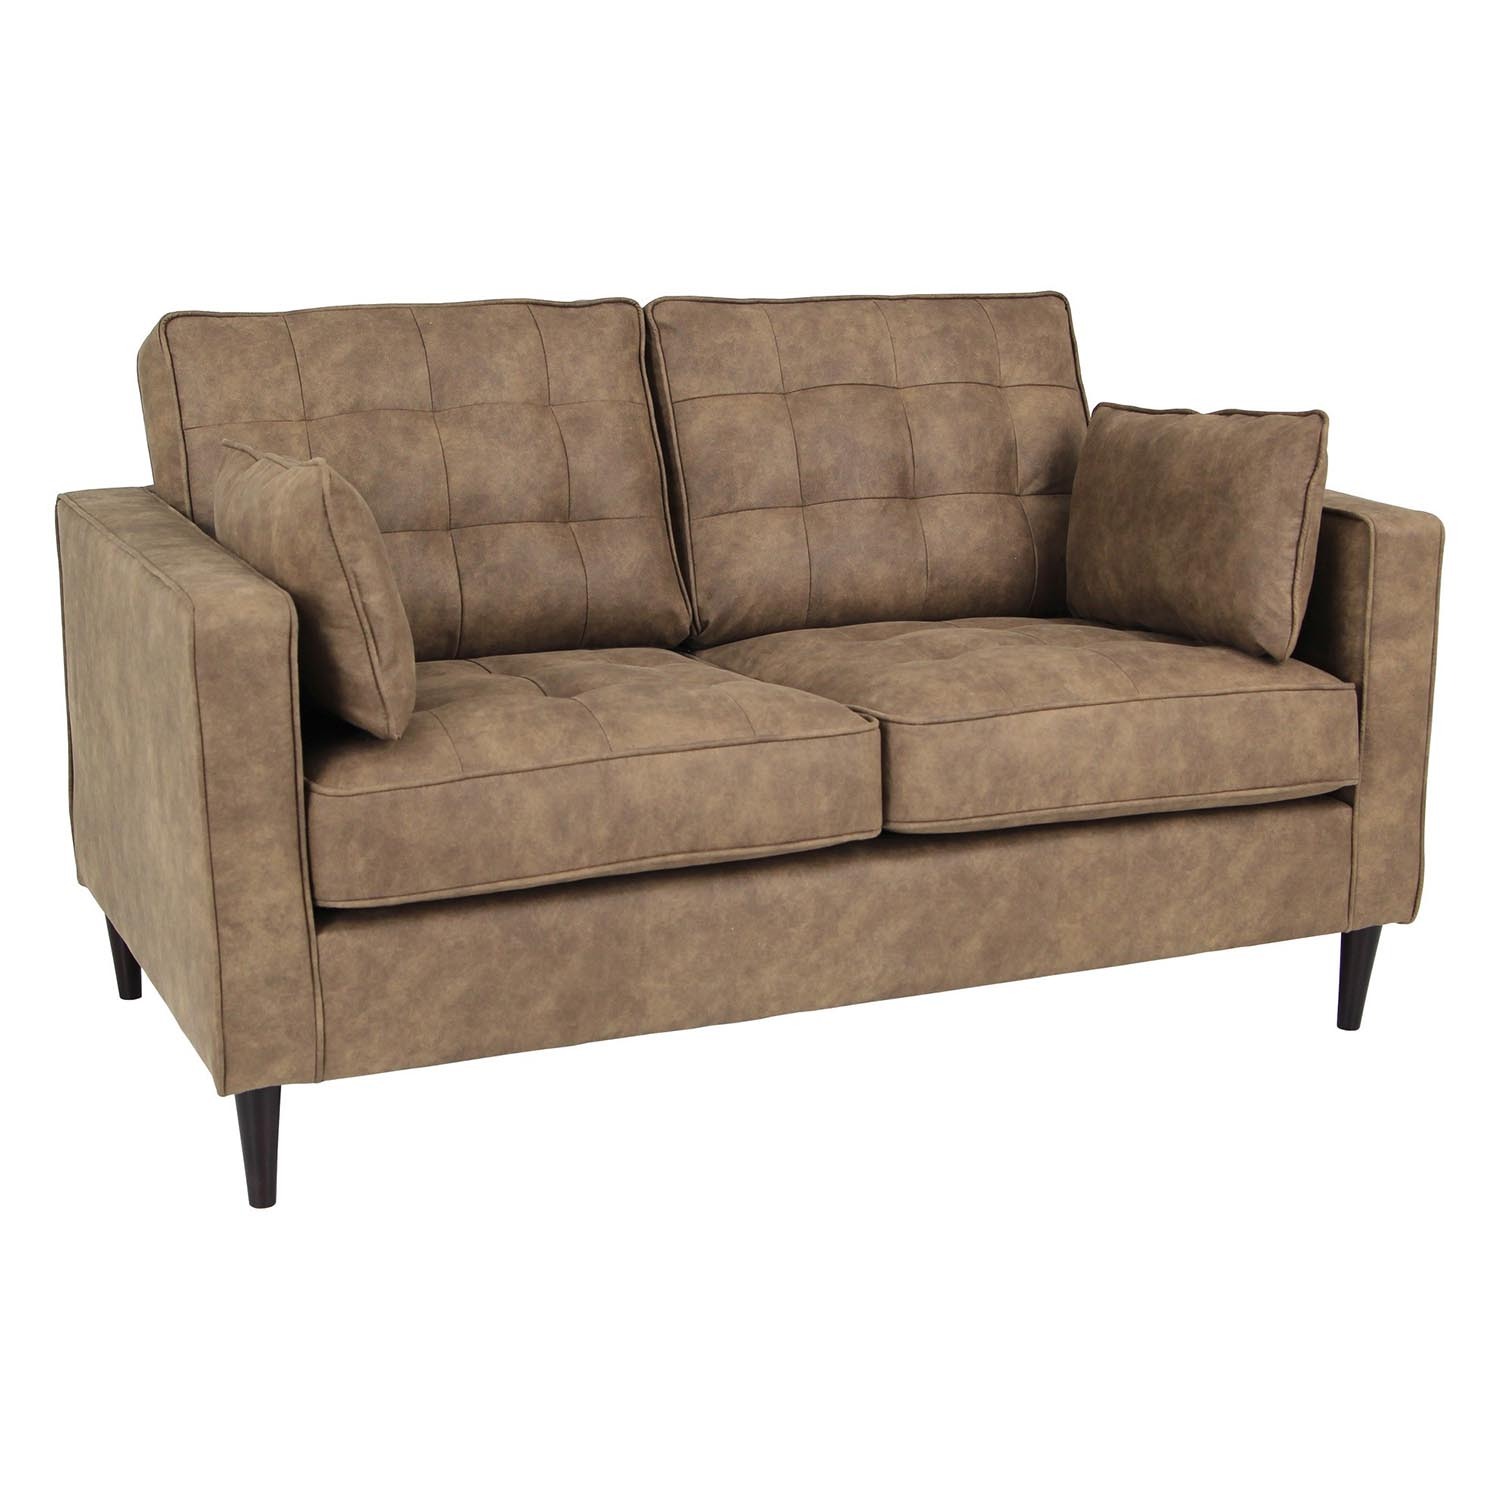 Anabelle 2 Seater Brown Fabric Sofa Image 2